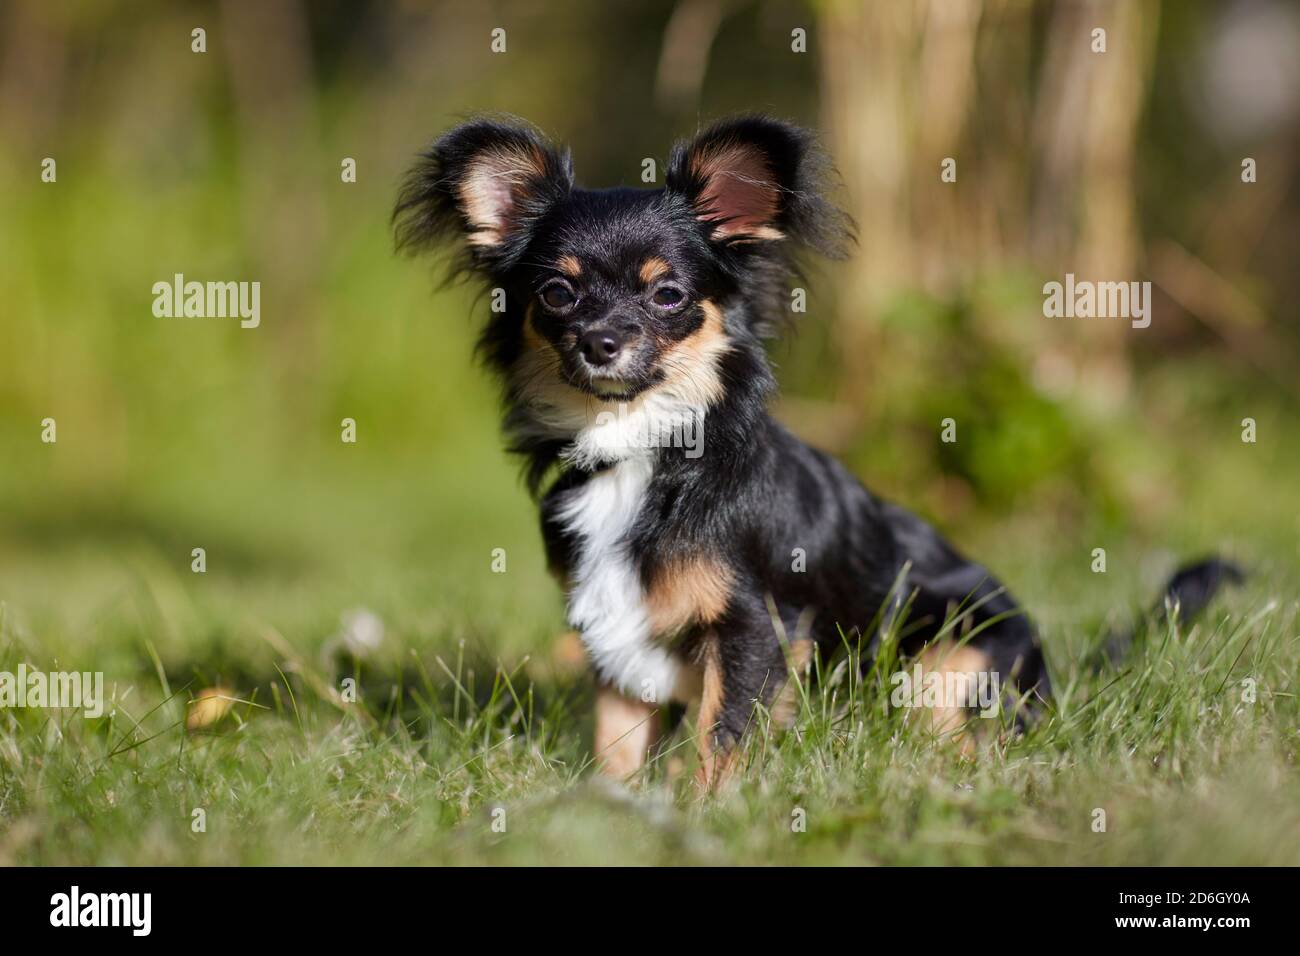 Portrait of a black juvenile long-haired Chihuahua dog sitting on green grass. Stock Photo